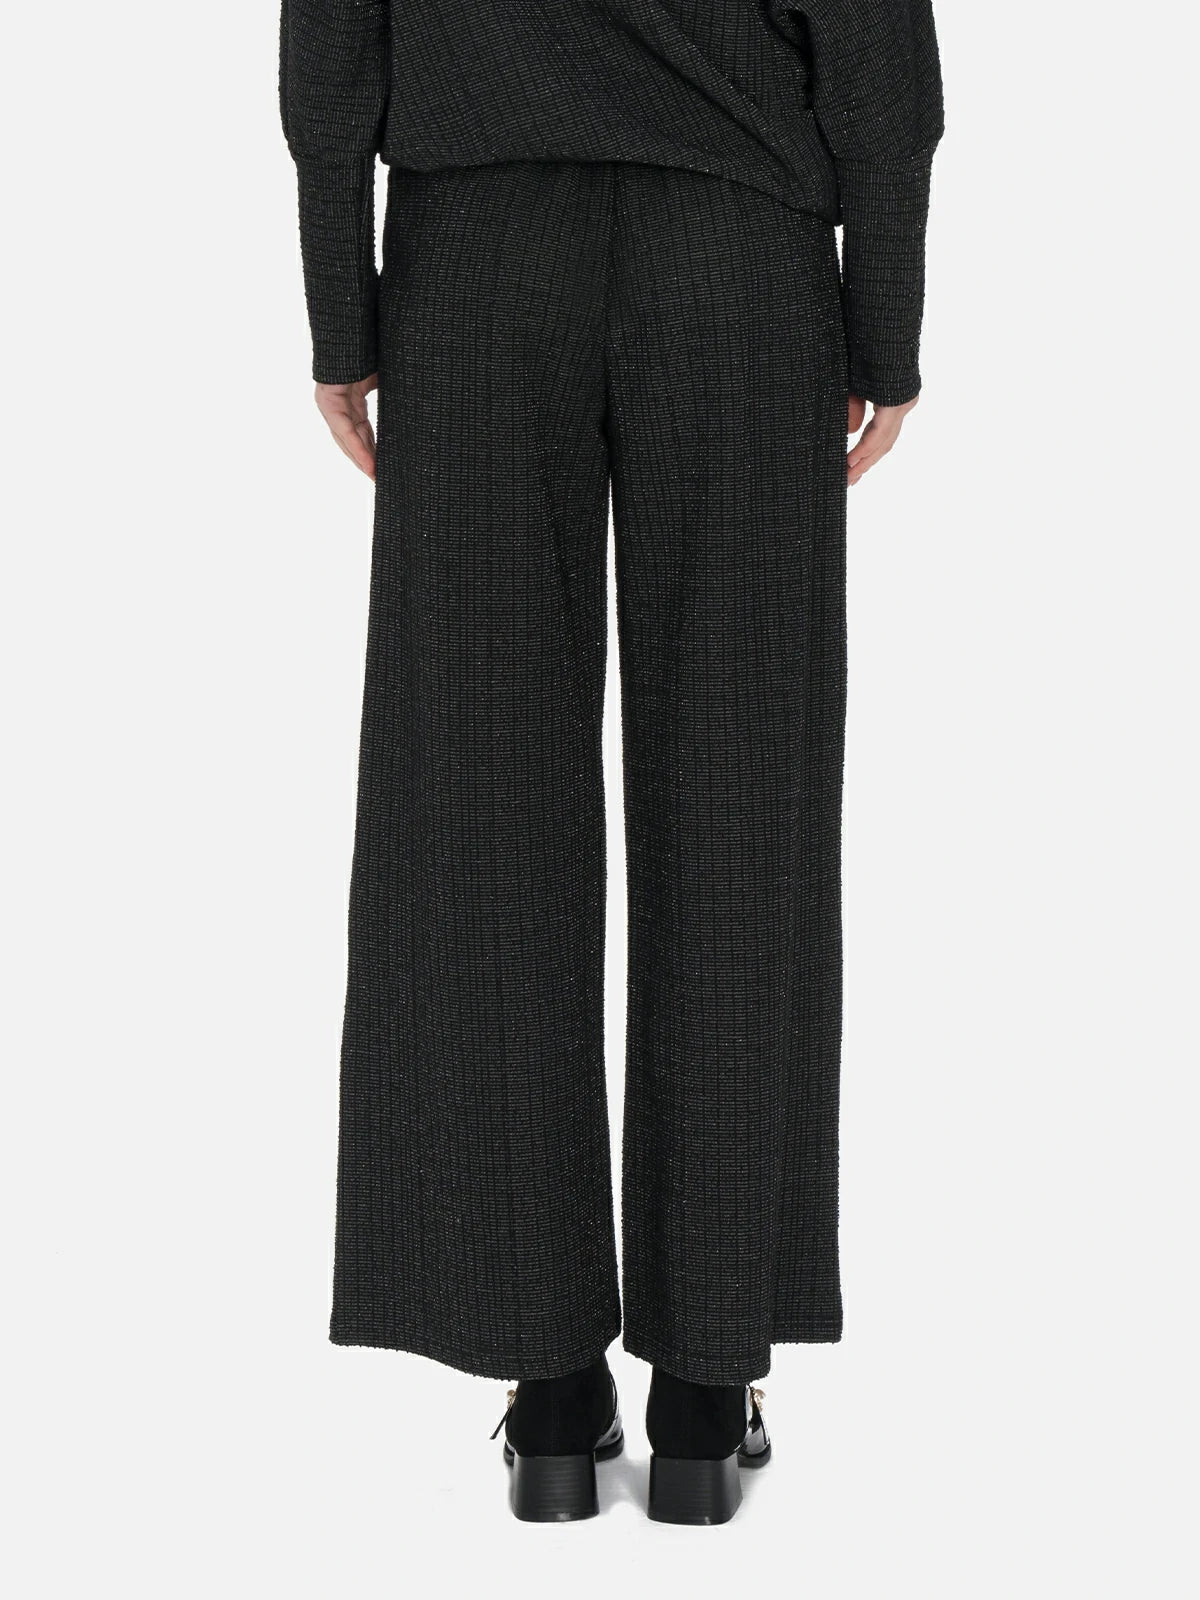 Comfortable and flowing loose-fit black trousers